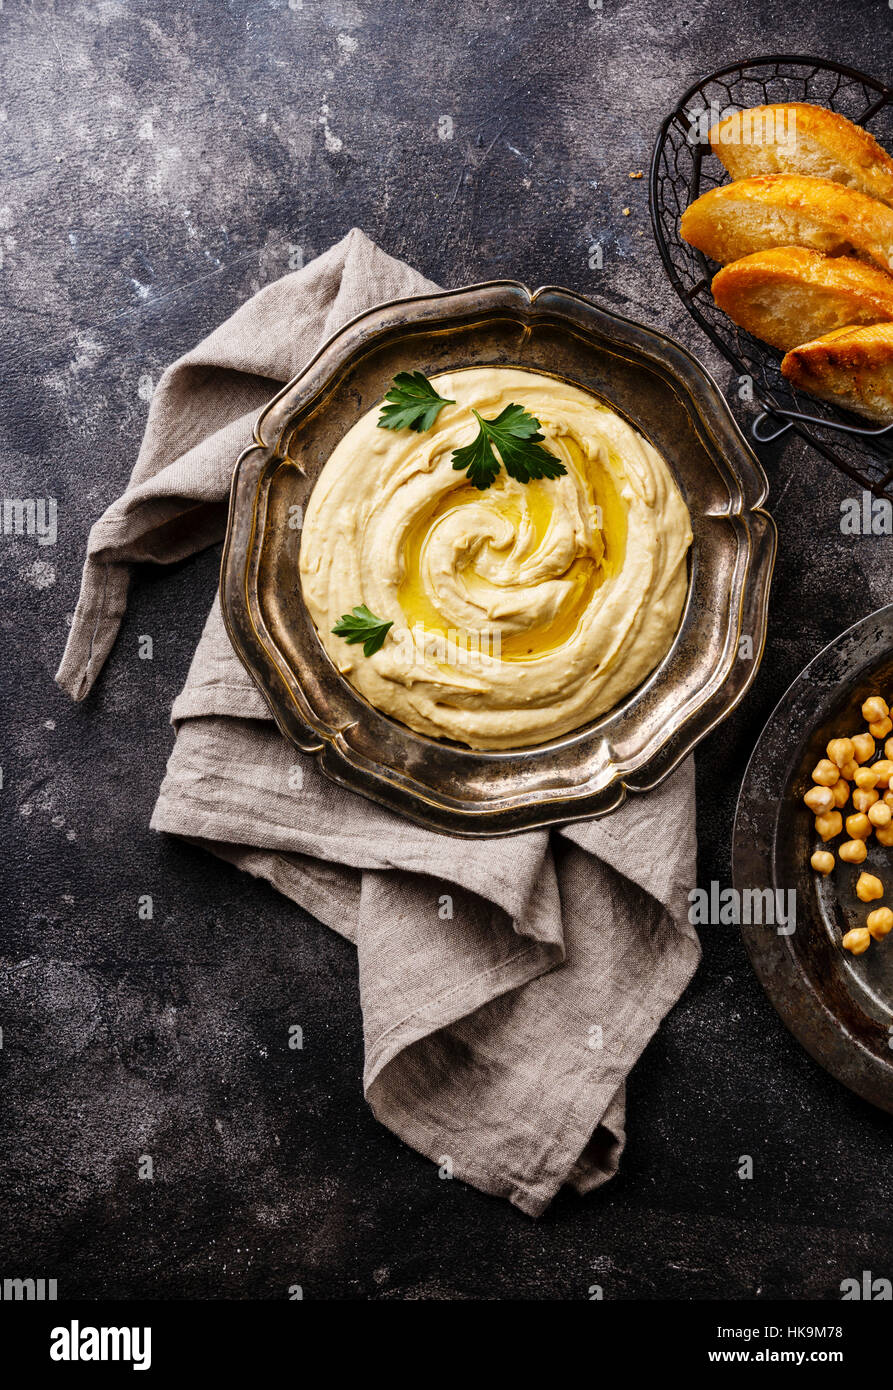 Homemade hummus with bread toasts in metal plate on black stone background Stock Photo